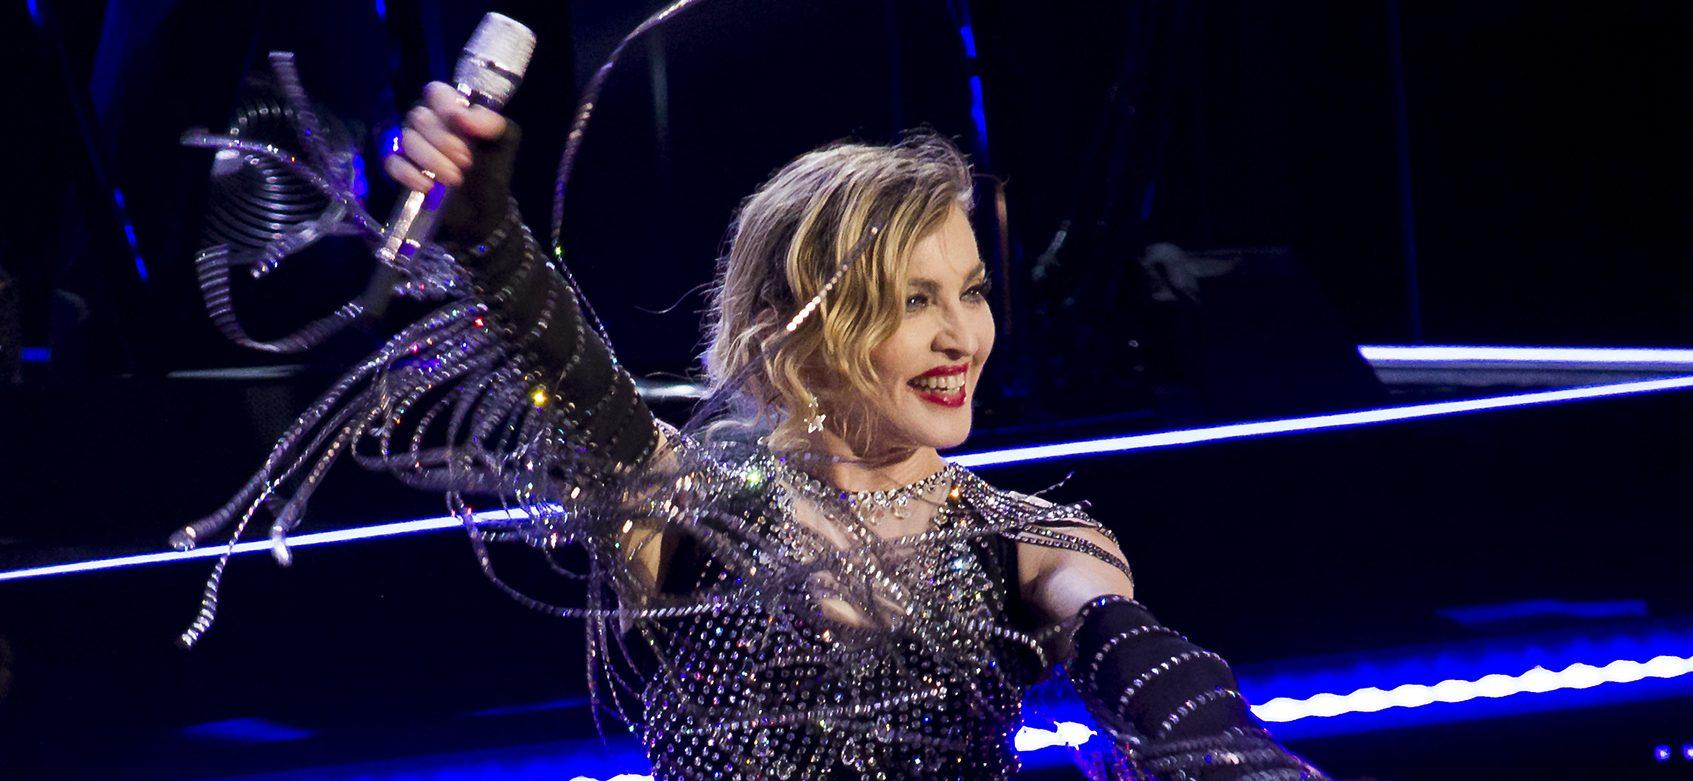 Madonna Goes Hard At Rehearsals For Upcoming Celebration Tour In Fishnets